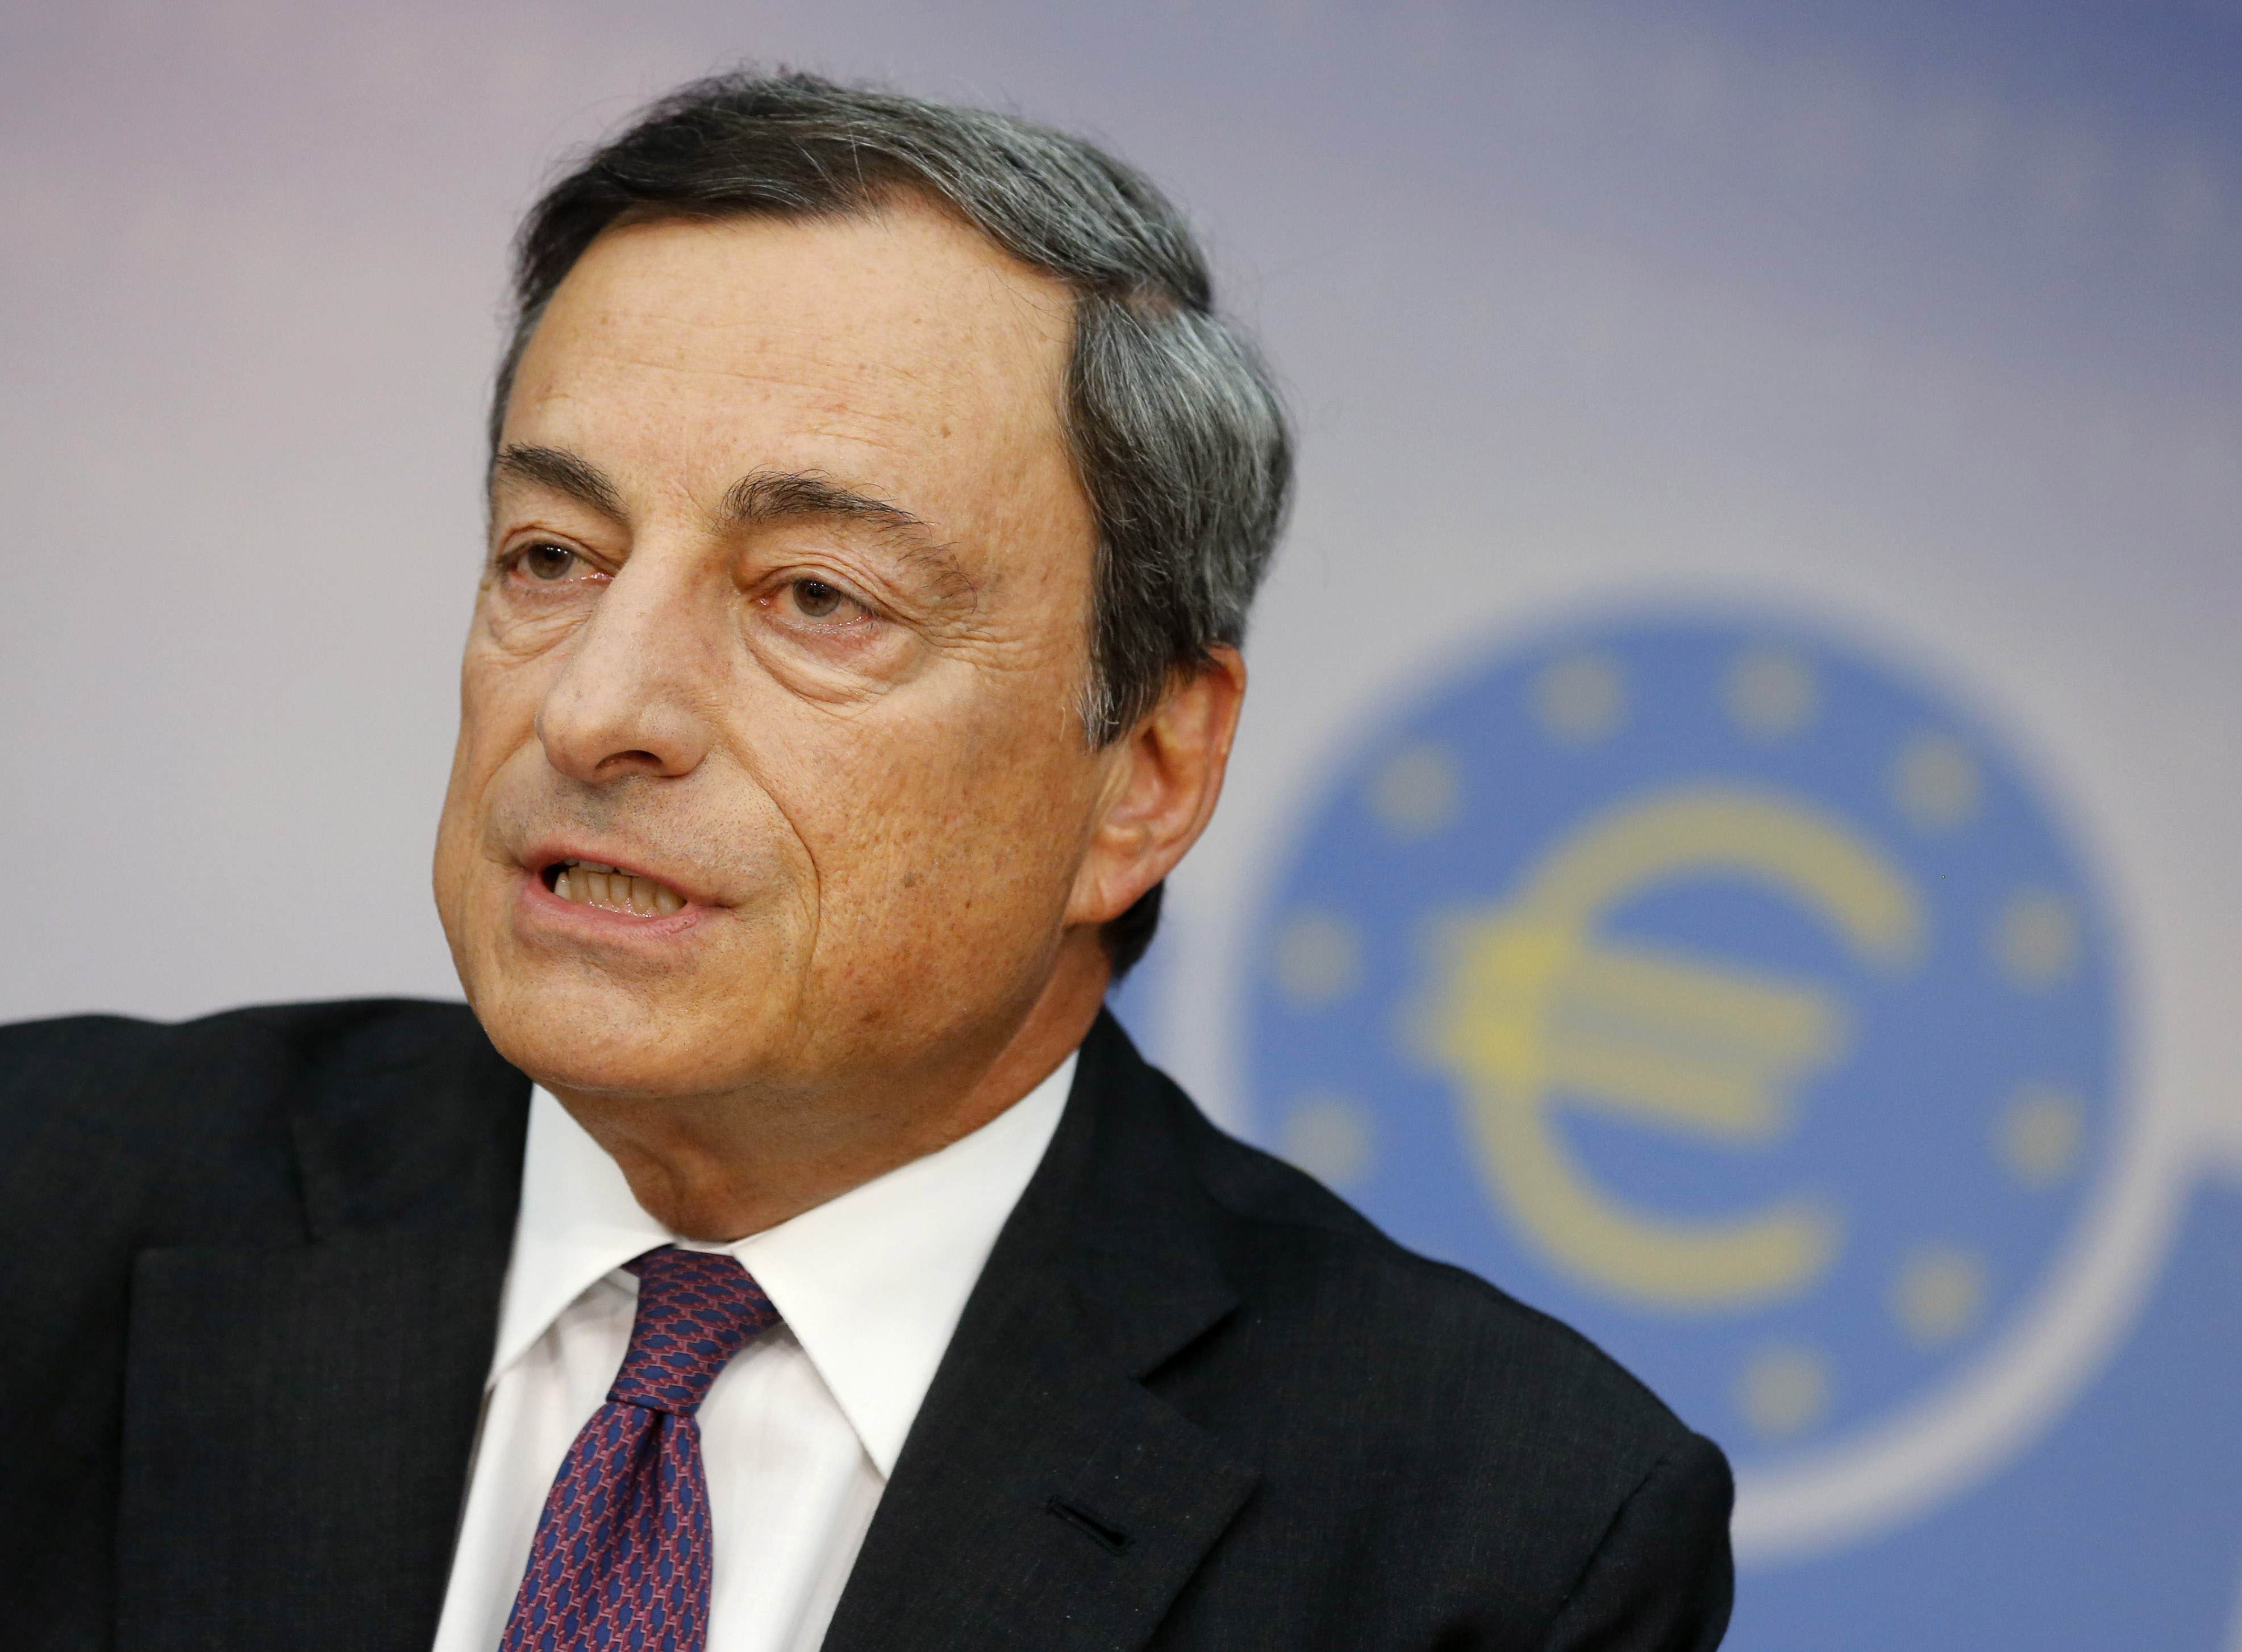 President of the European Central Bank Mario Draghi talks during a news conference in Frankfurt on Sept. 4, 2014 (Michael Probst—AP)